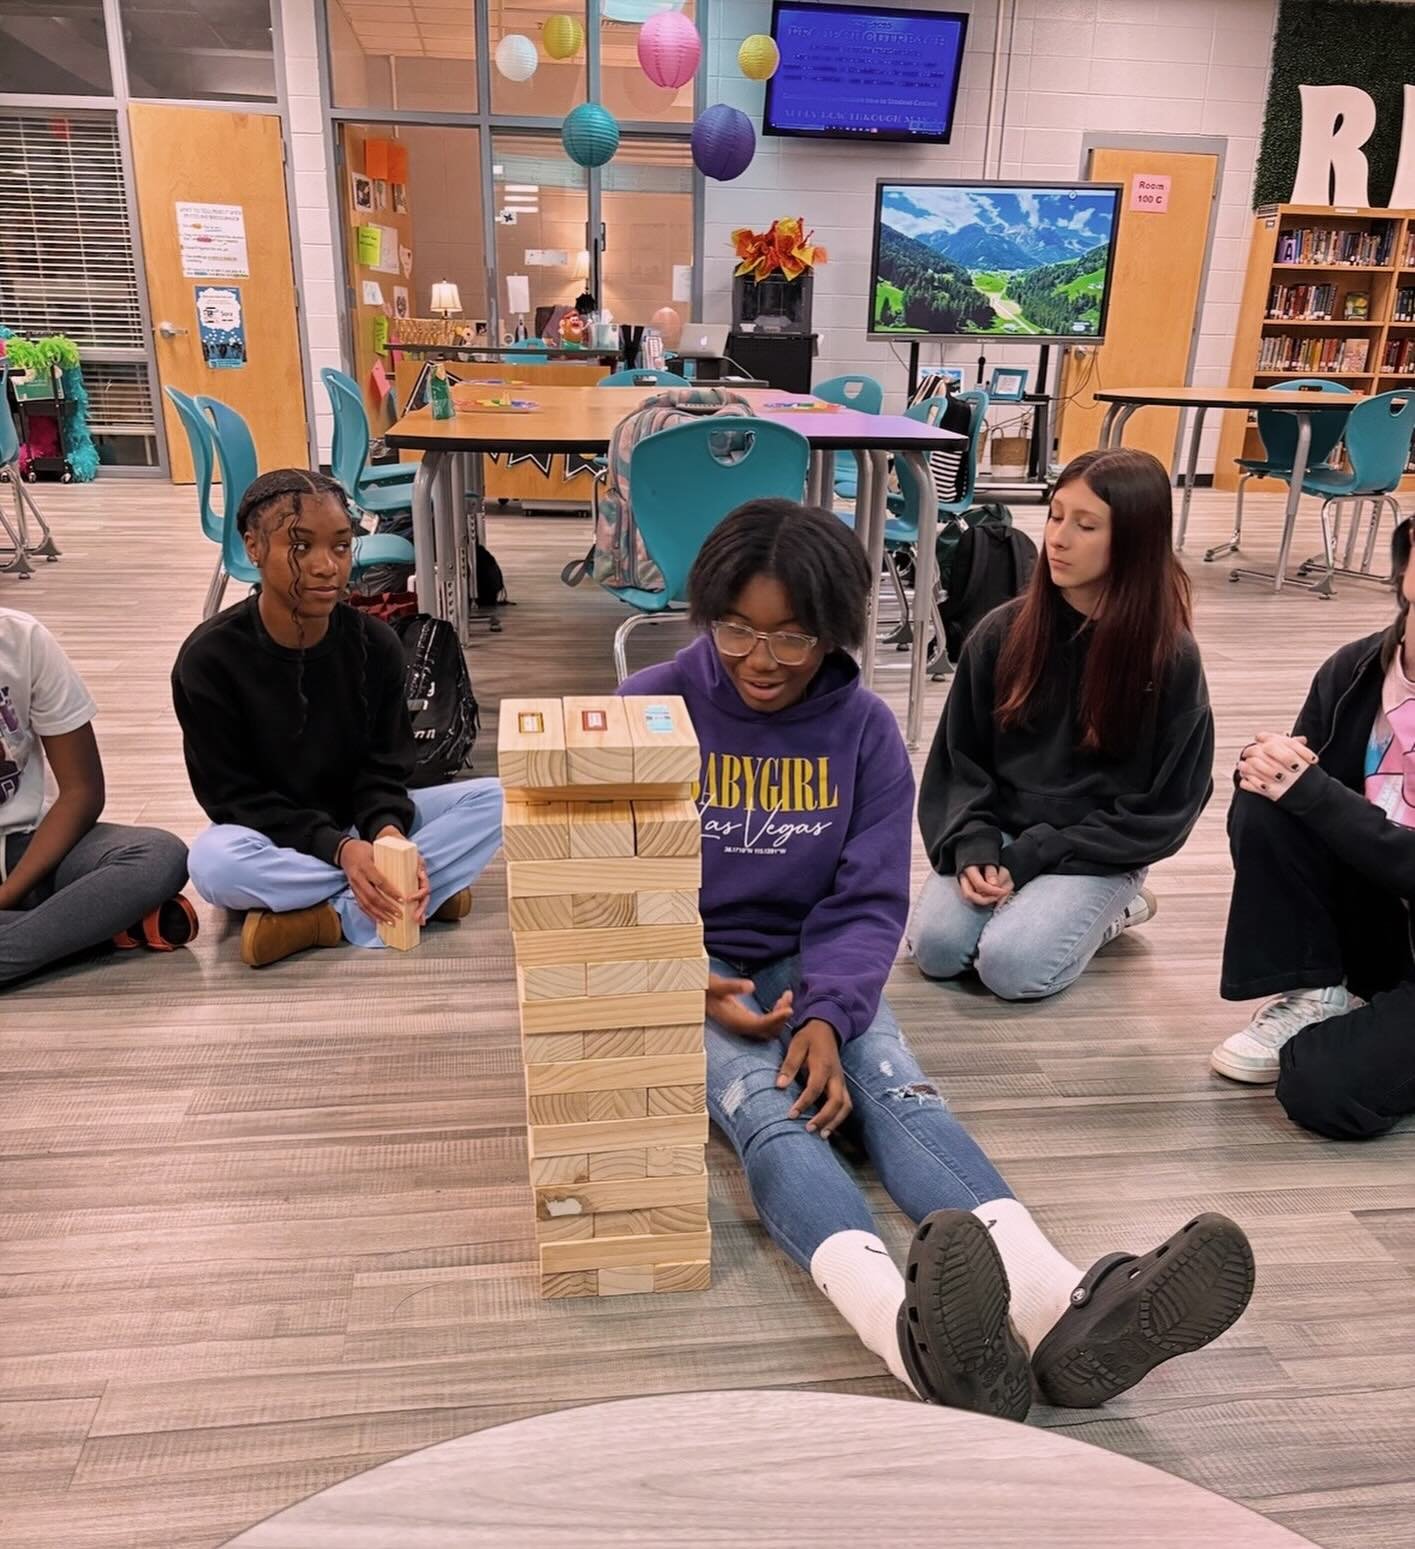 Last week we played Jenga during our school programs. We discussed resilience, and the importance of being able to healthily cope with the adversities that we face. The blocks each contained a question about resilience, and the girls shared about how